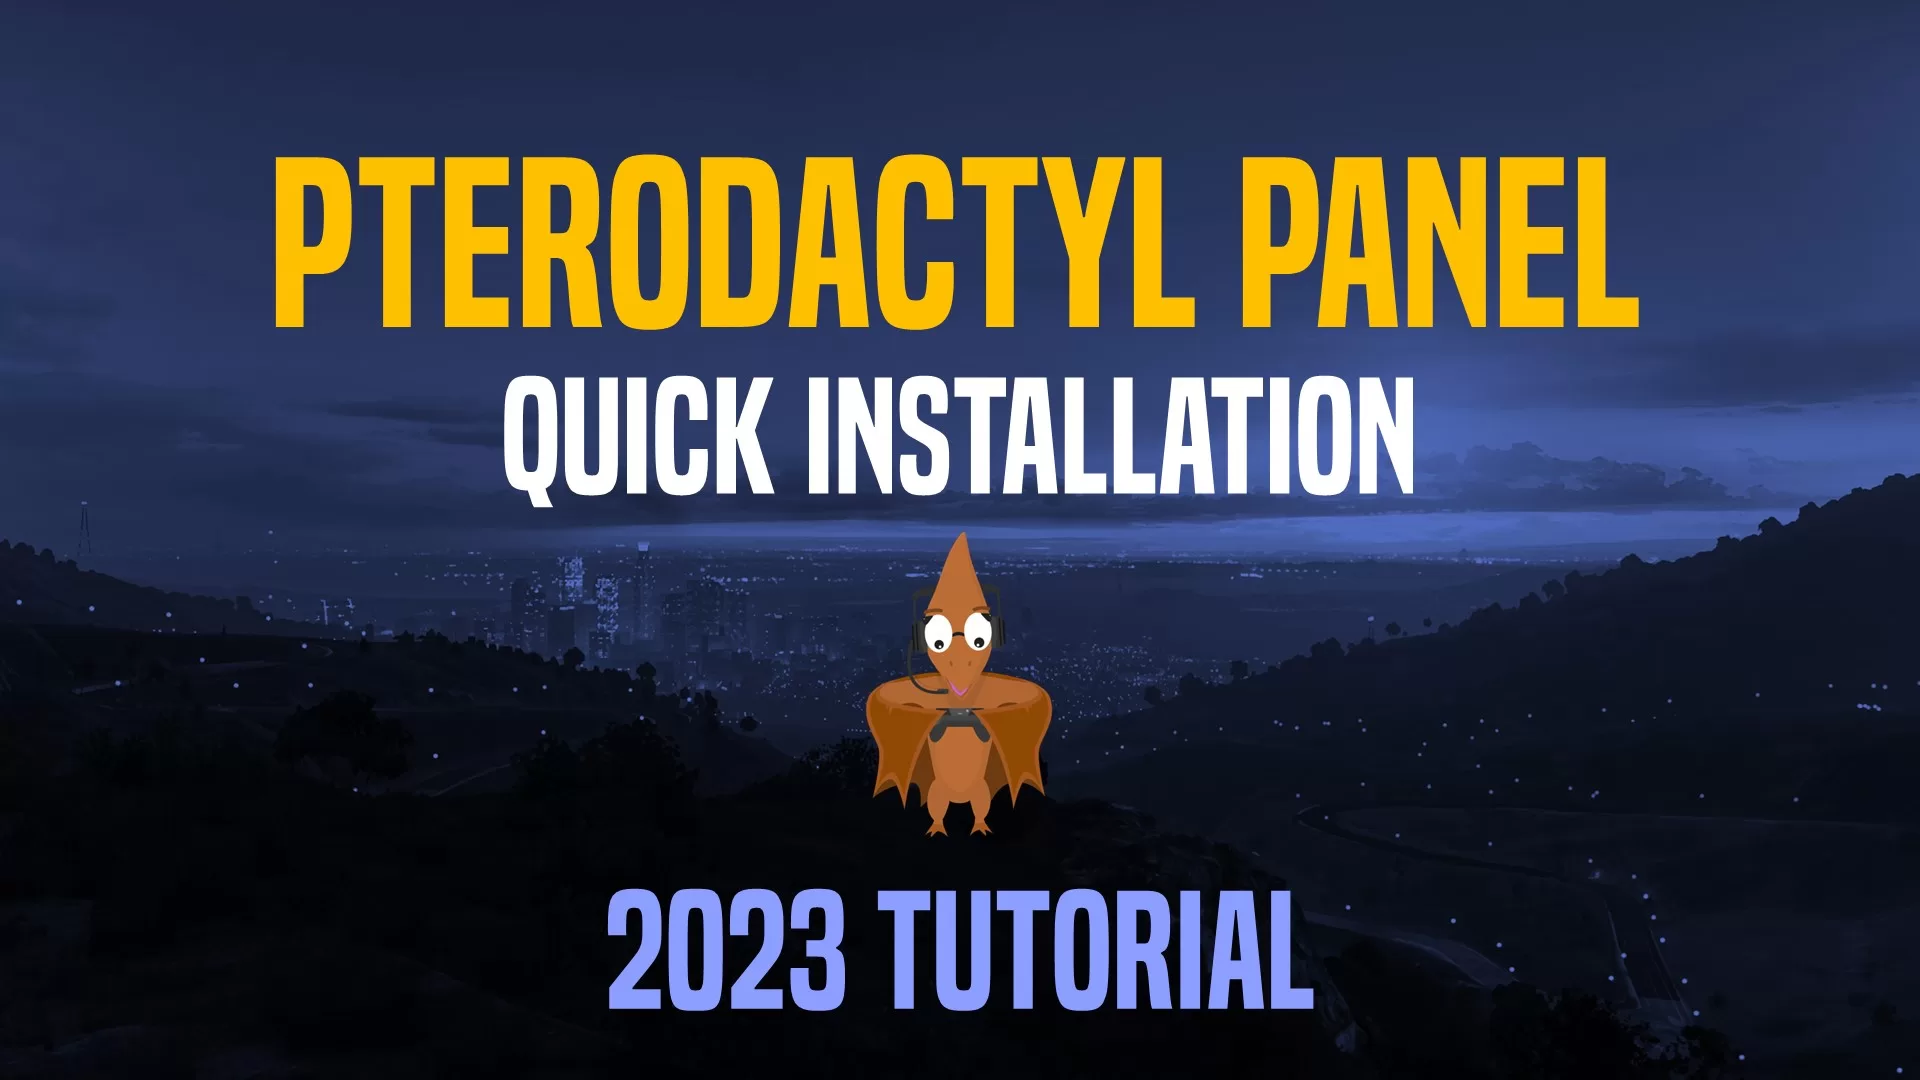 How do i install Pterodactyl panel on my OVH vps